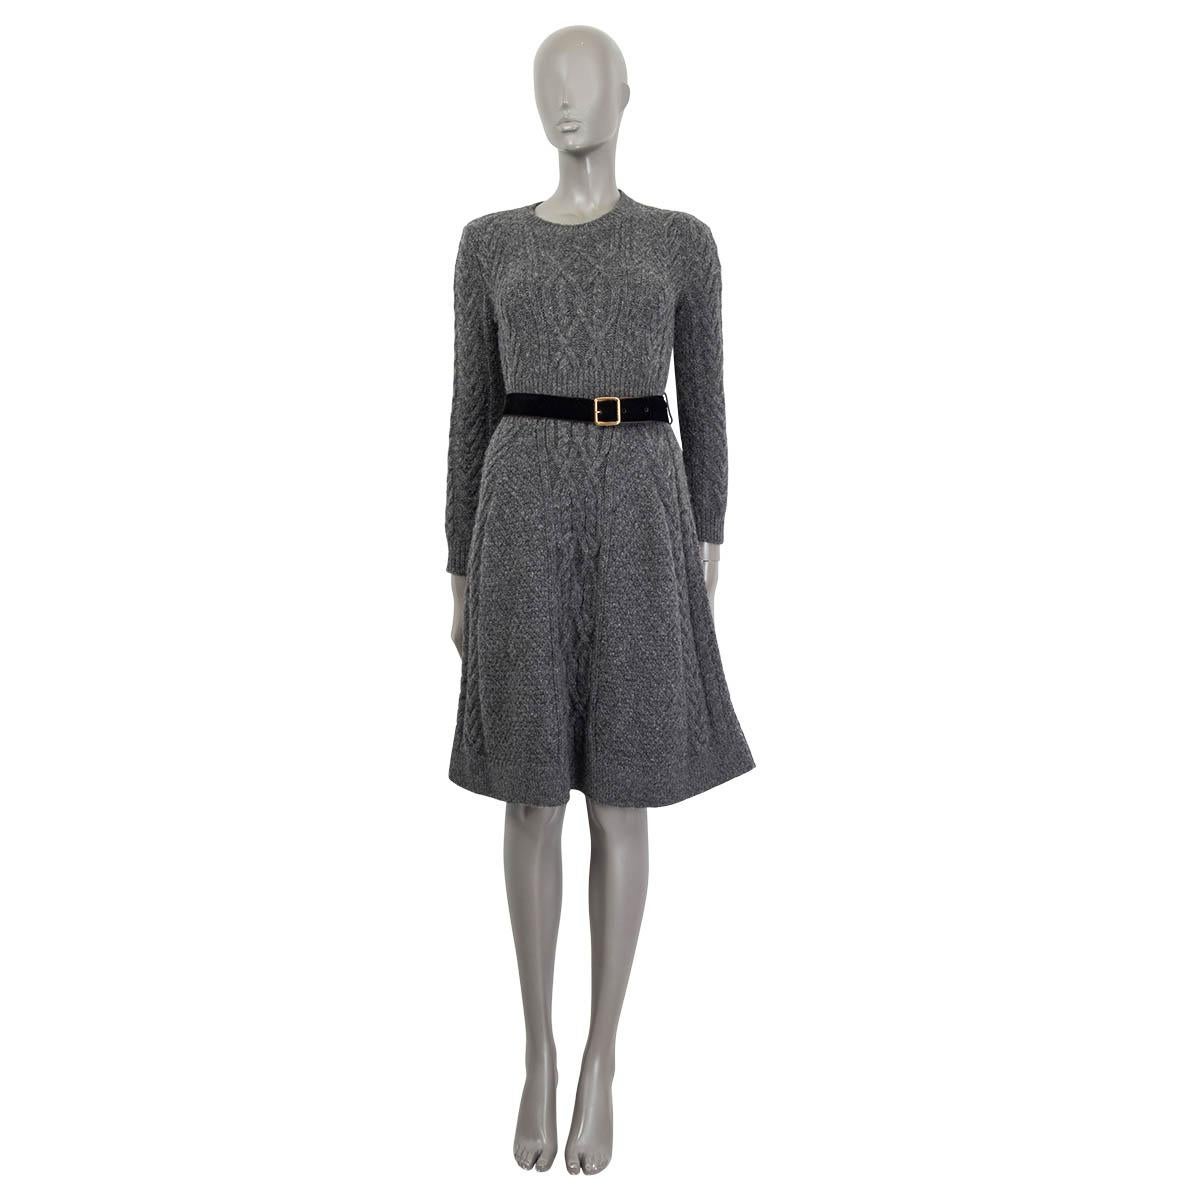 100% authentic Louis Vuitton belted chunky knit dress in gray alpaca (62%), polyamide (22%) and wool (16%). Features a detachable velvet belt with a gold buckle, belt loops and long sleeves. Unlined. Has been worn and is in excellent